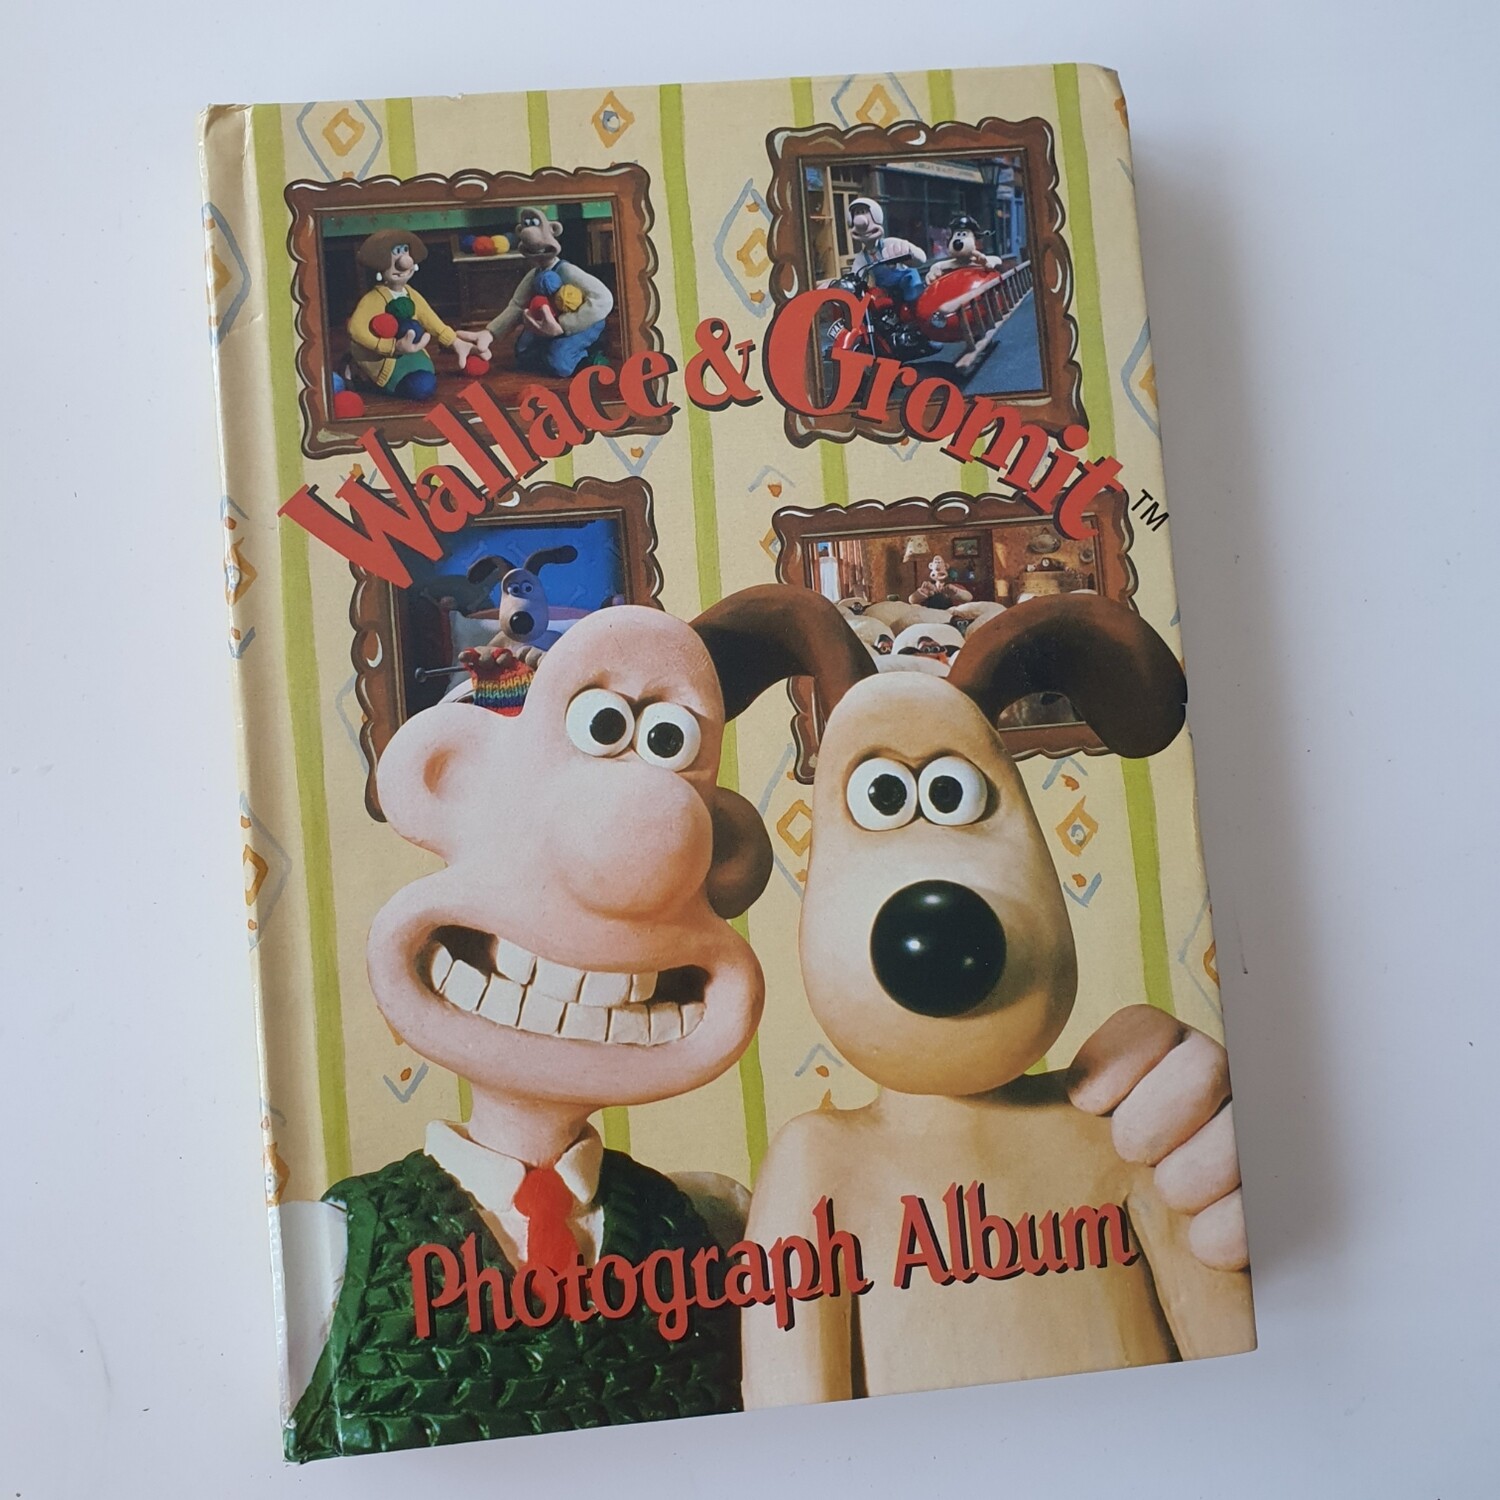 Wallace and Gromit notebook (Photograph Album)